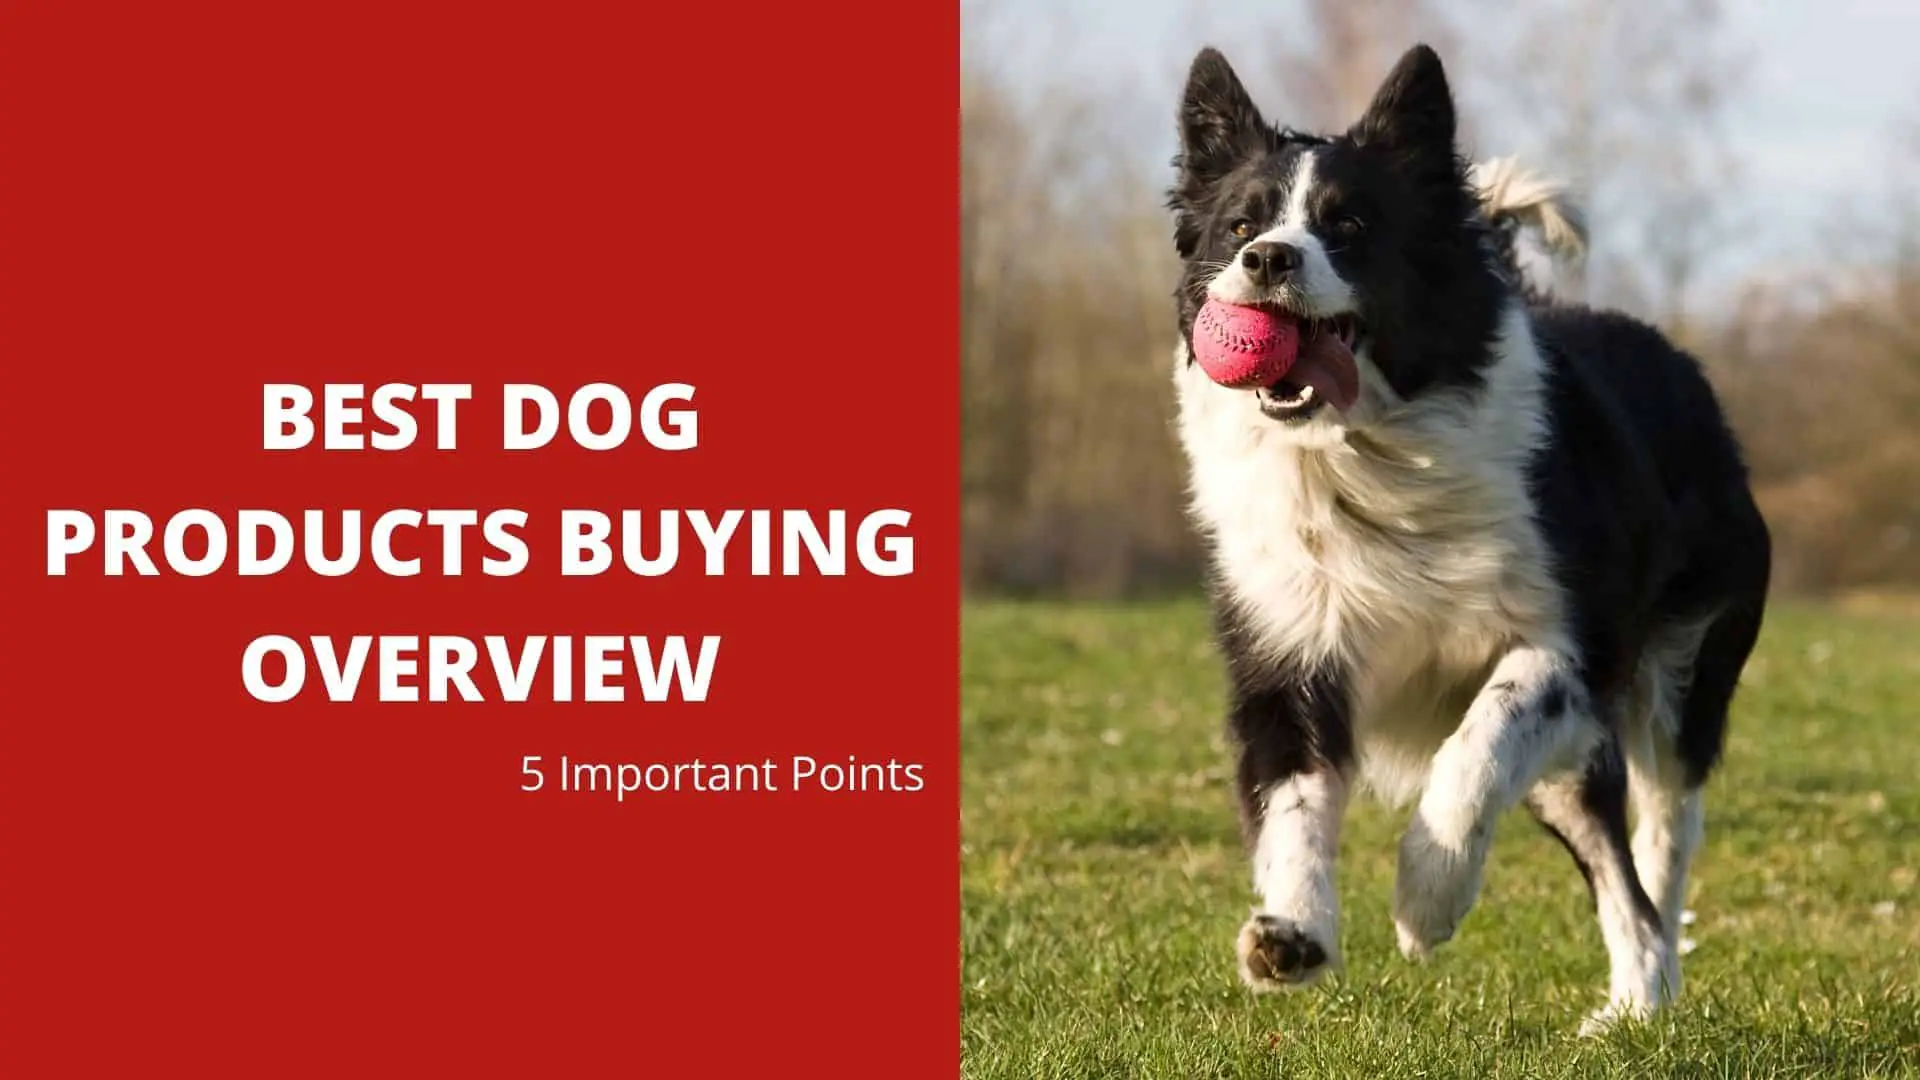 Best Dog Products Buying Overview – 5 Important Points